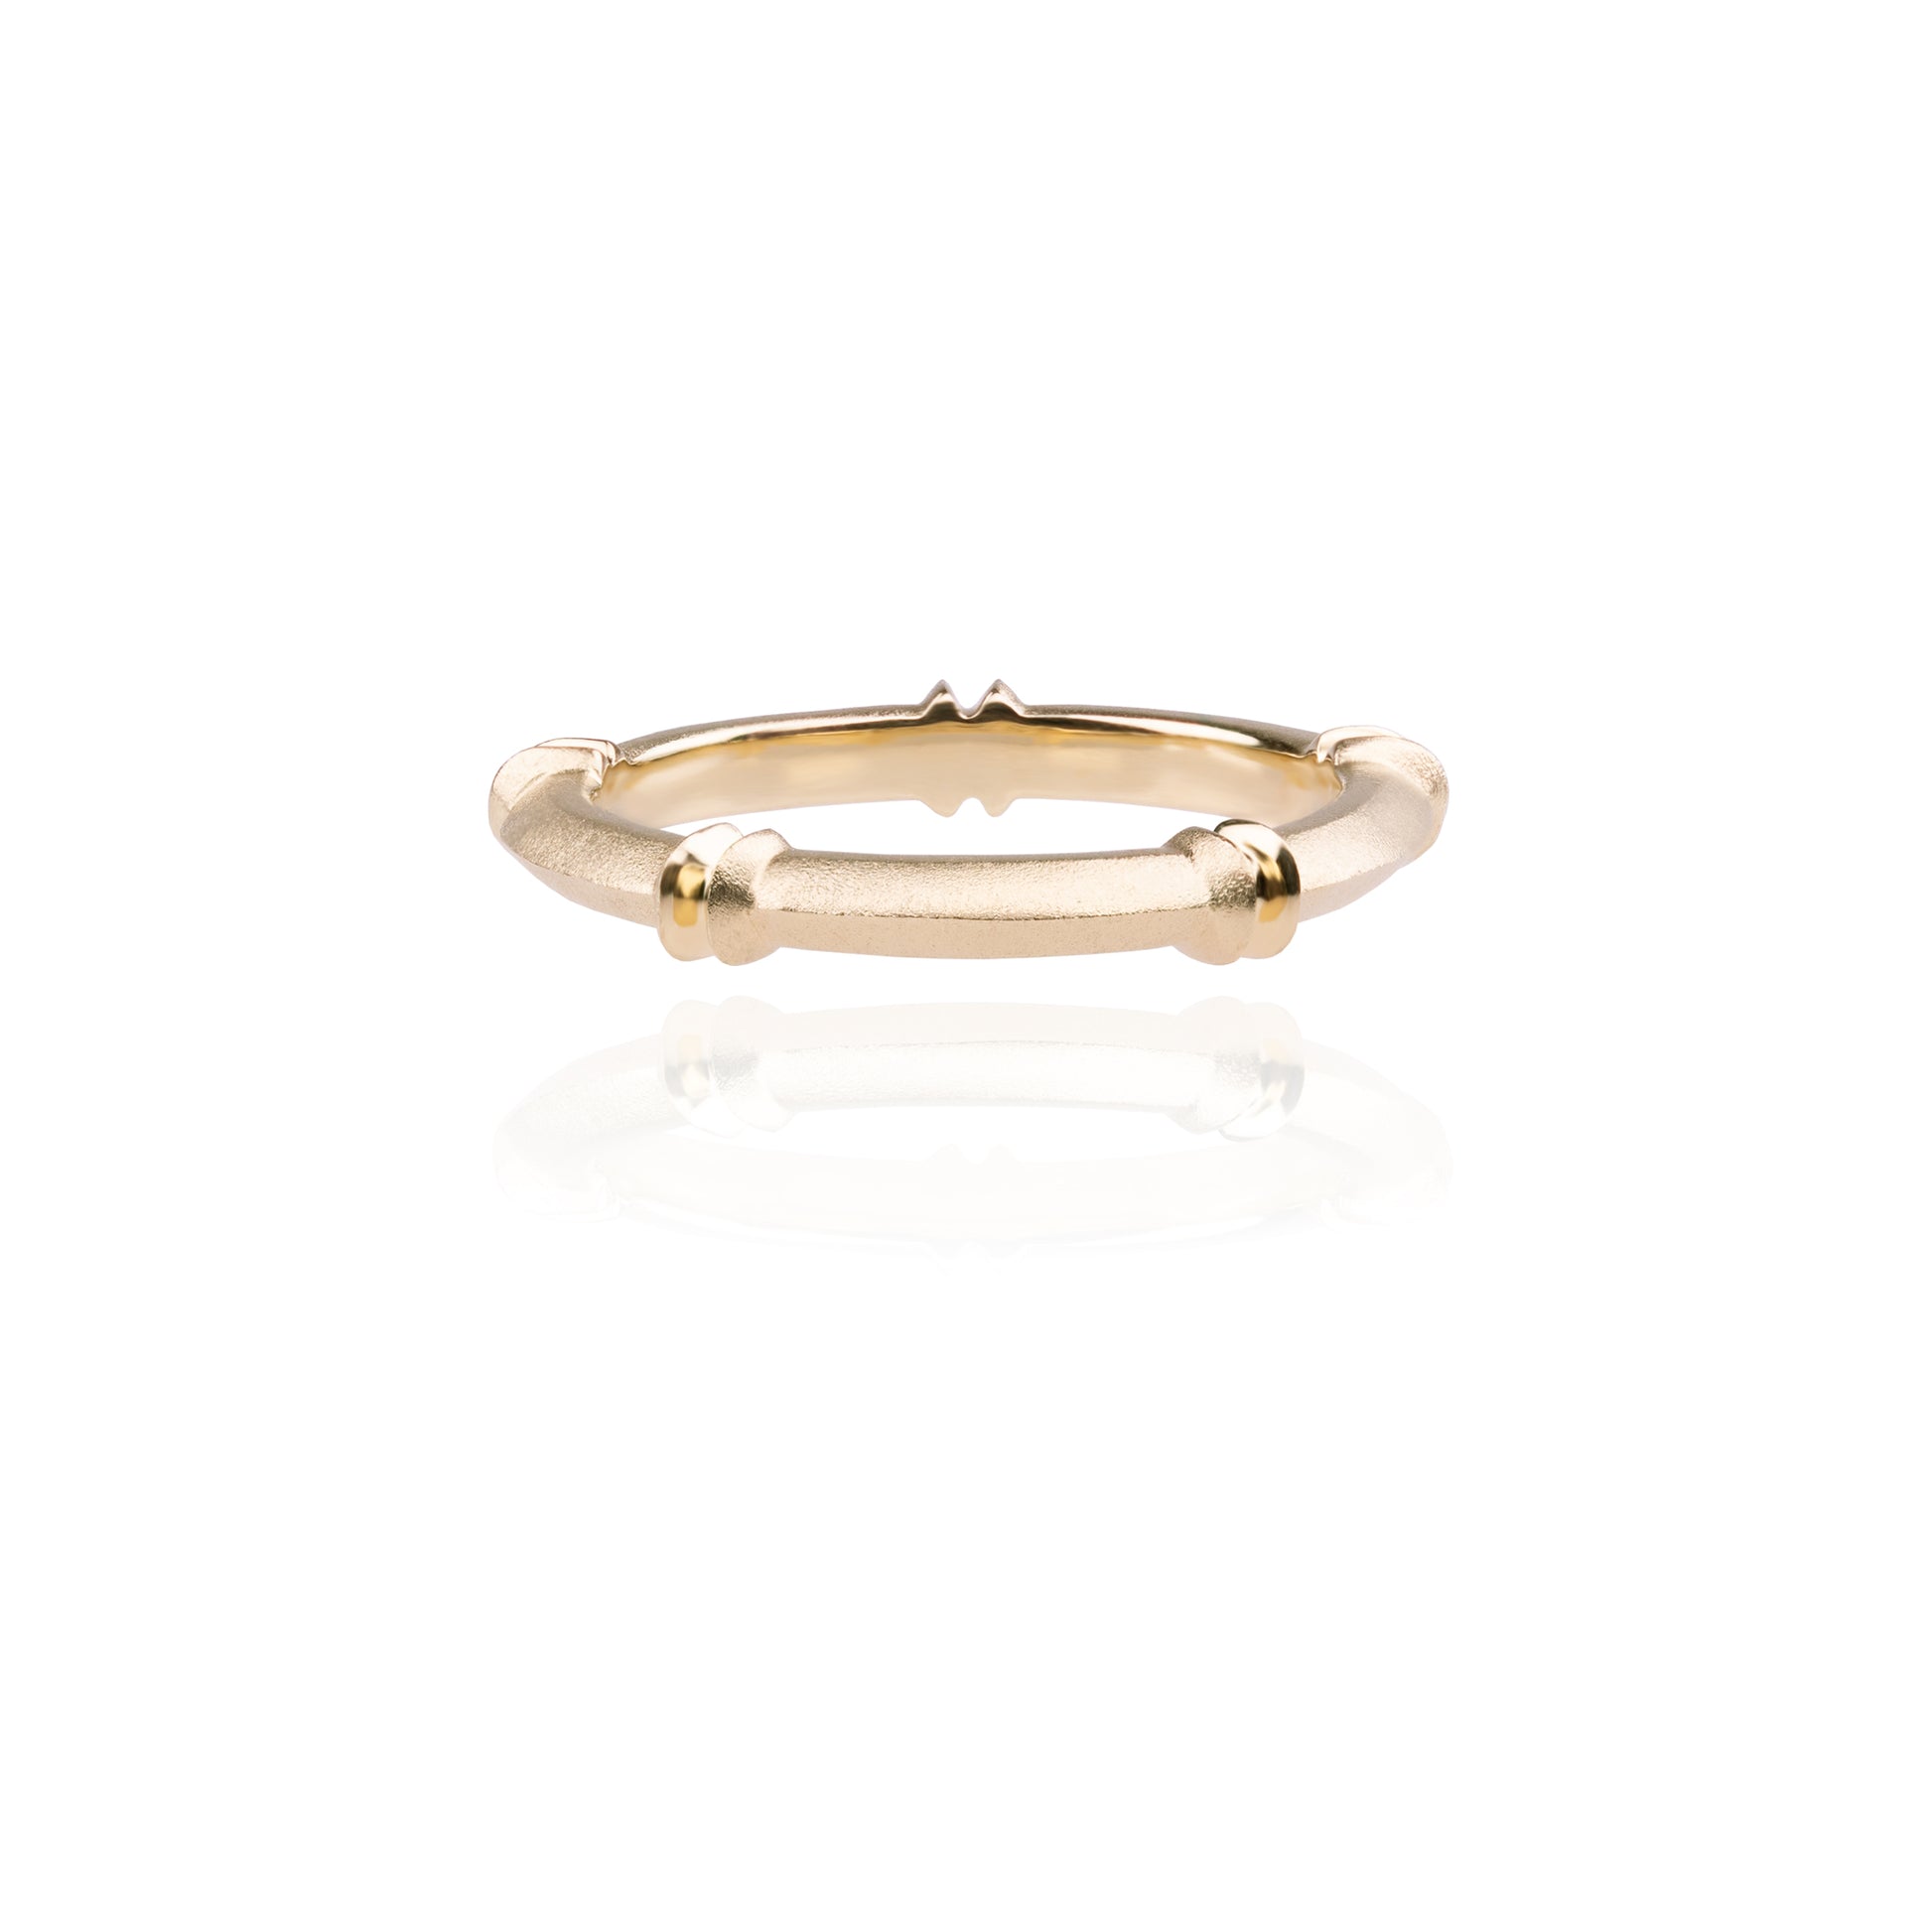 Orme-Brown_Contemporary_Jewellery_Drifts_Dune_Wedding_Band_Knife_edge_18ct_yellow_gold_recycled_fairmined_sustainable_ethical